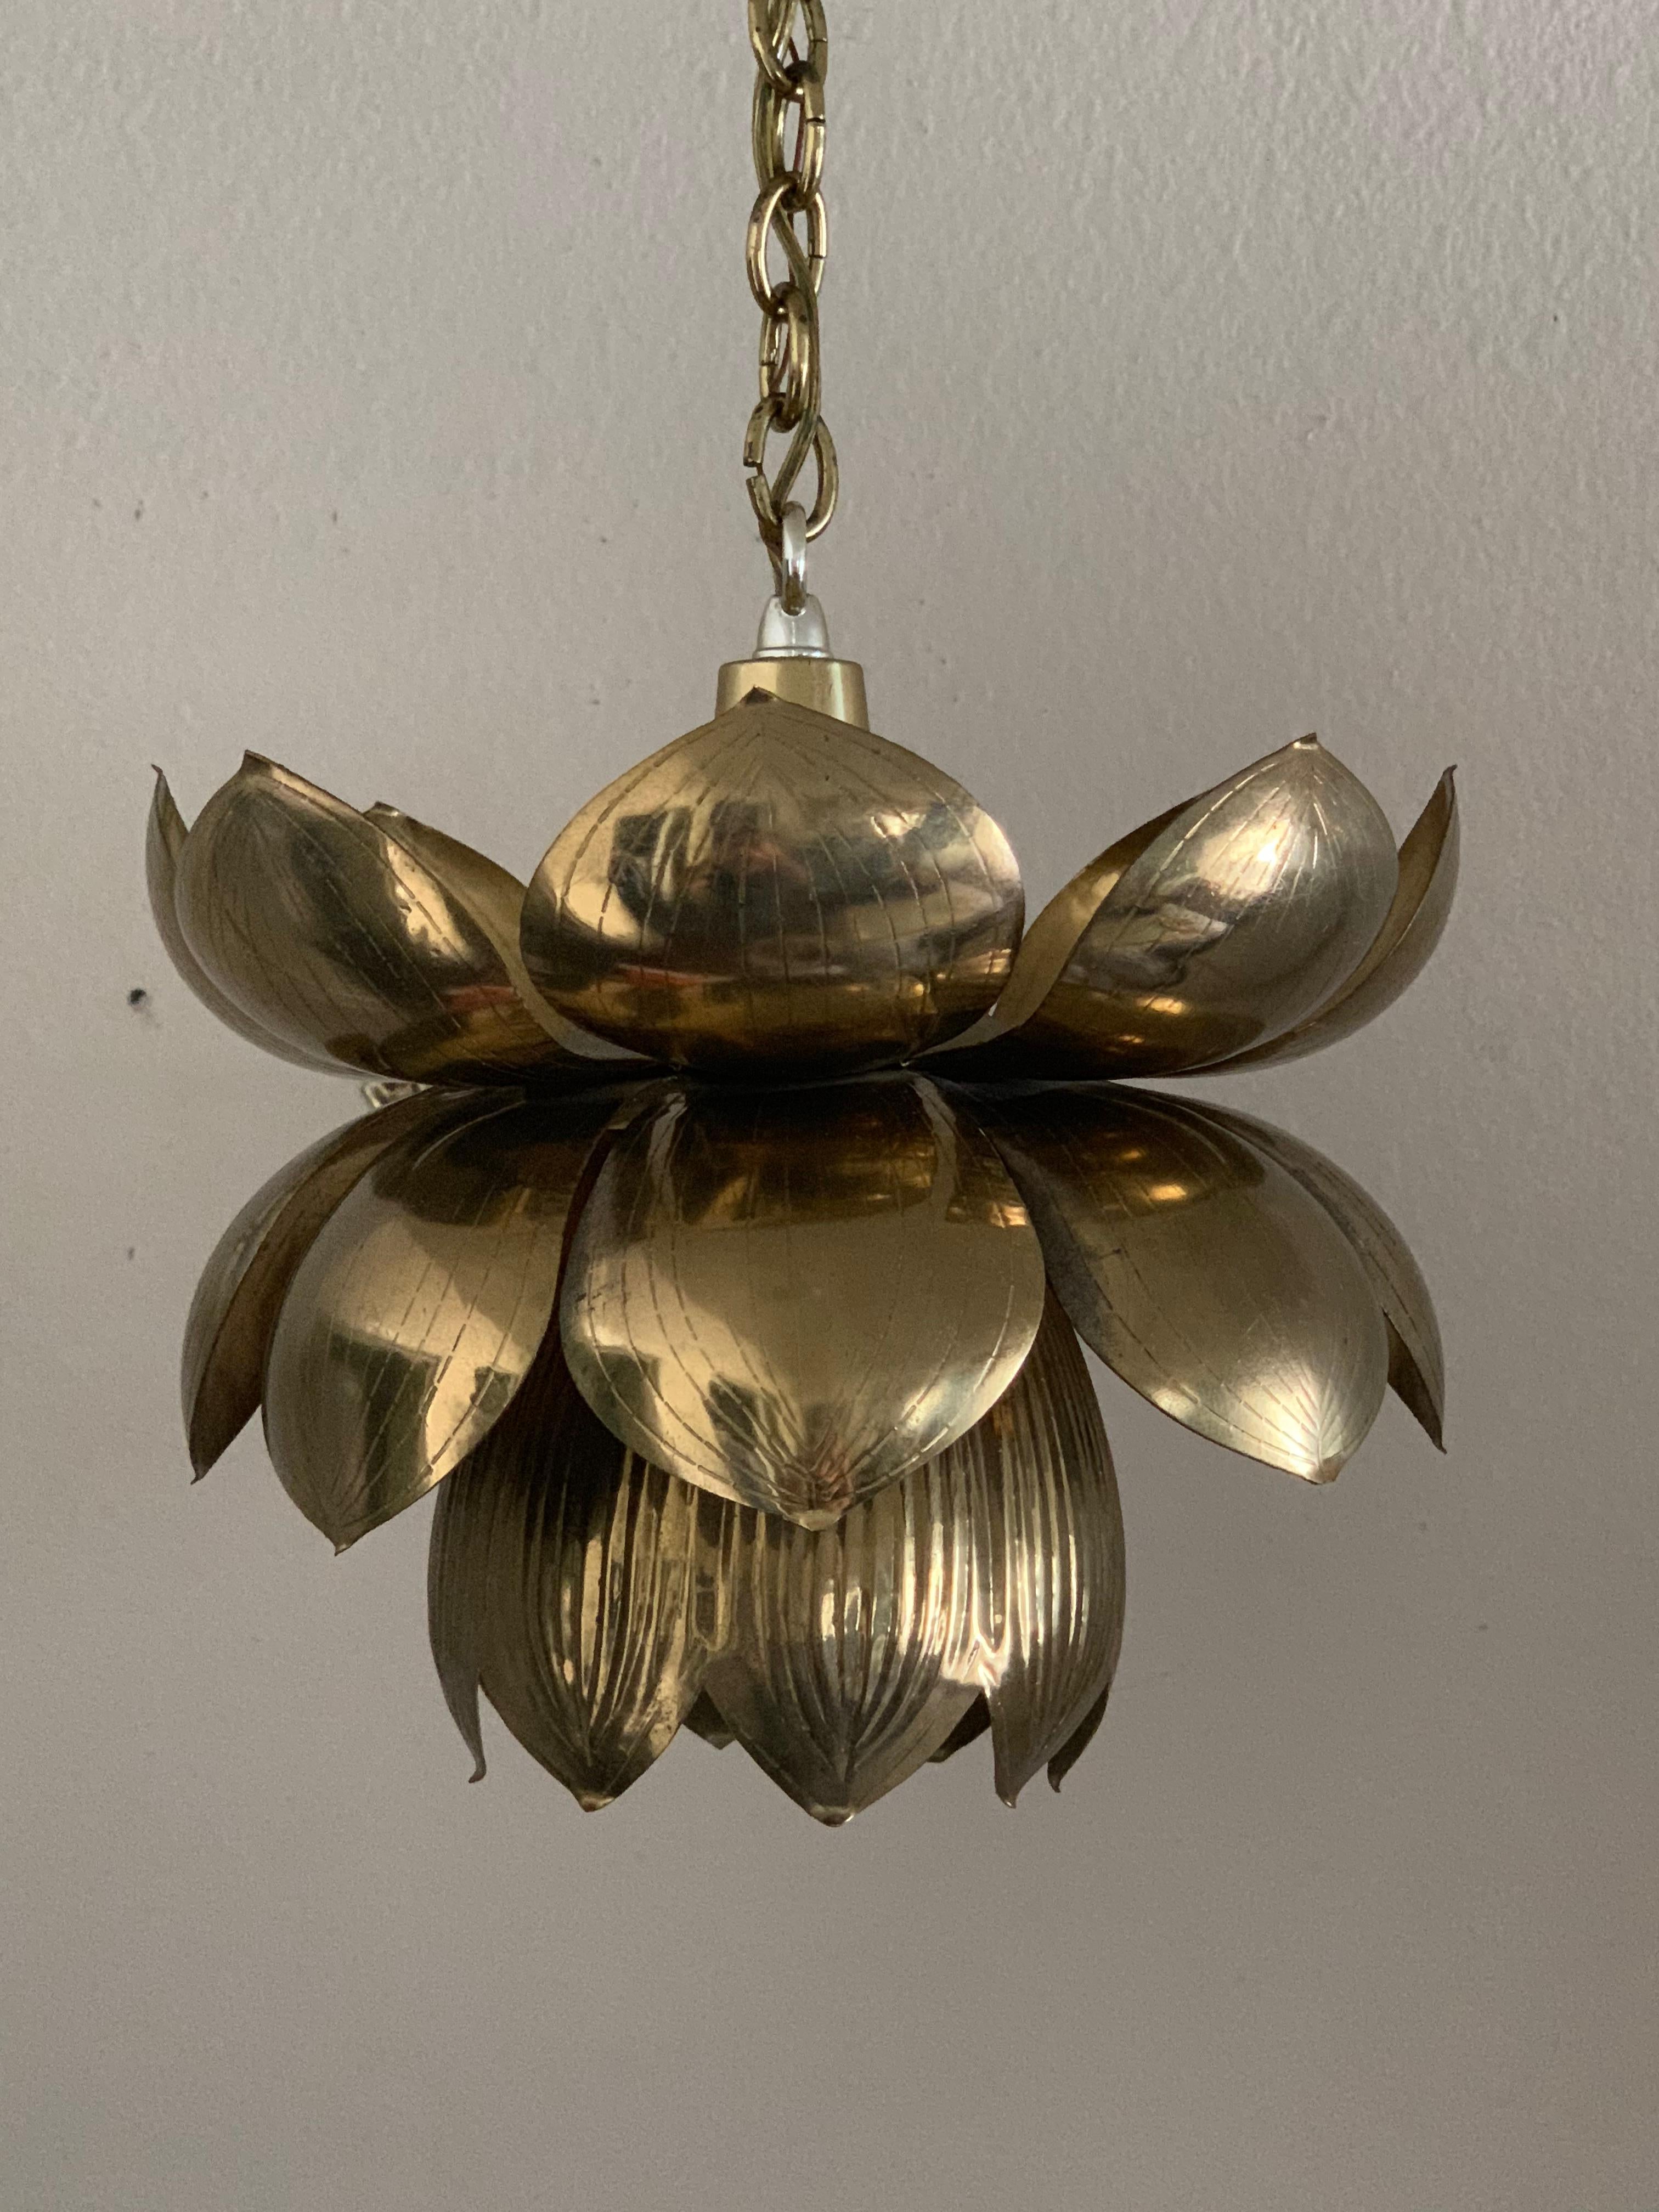 Small brass lotus pendant by Feldman. Can be polished if desired for additional $125
Lotus is about 10